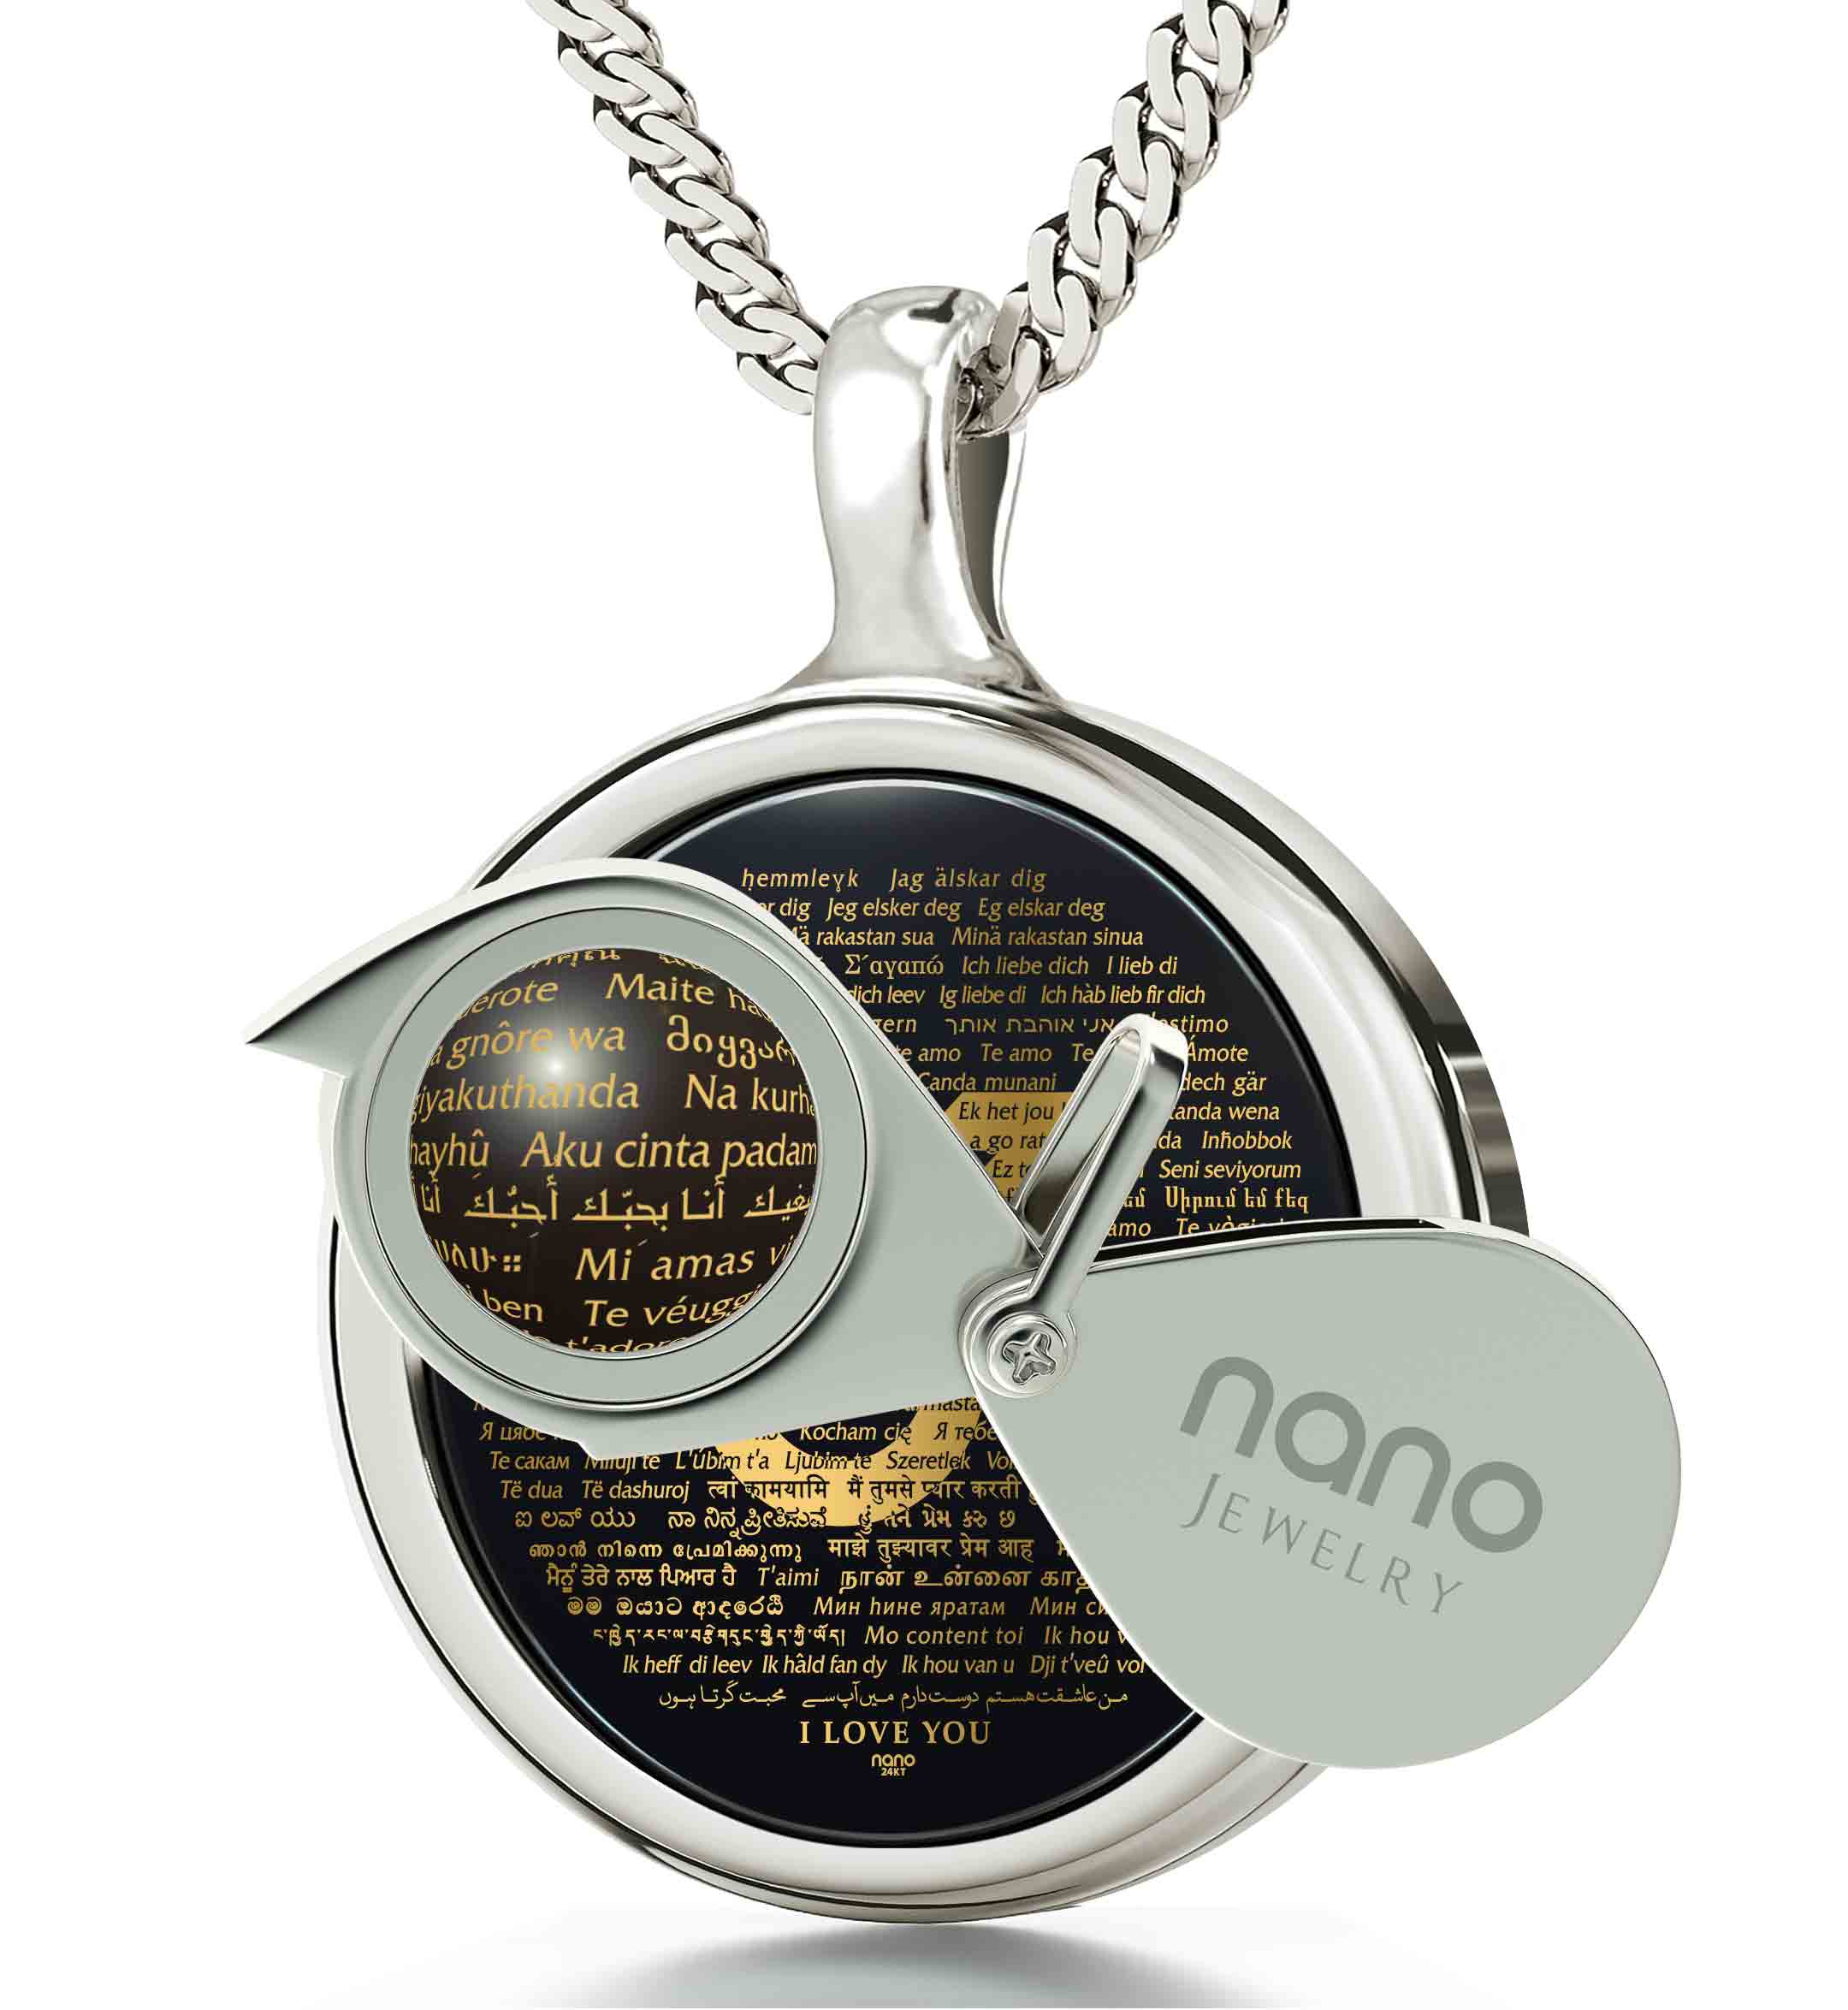 Round Onyx Pendant - 'I Love You' in 120 Languages